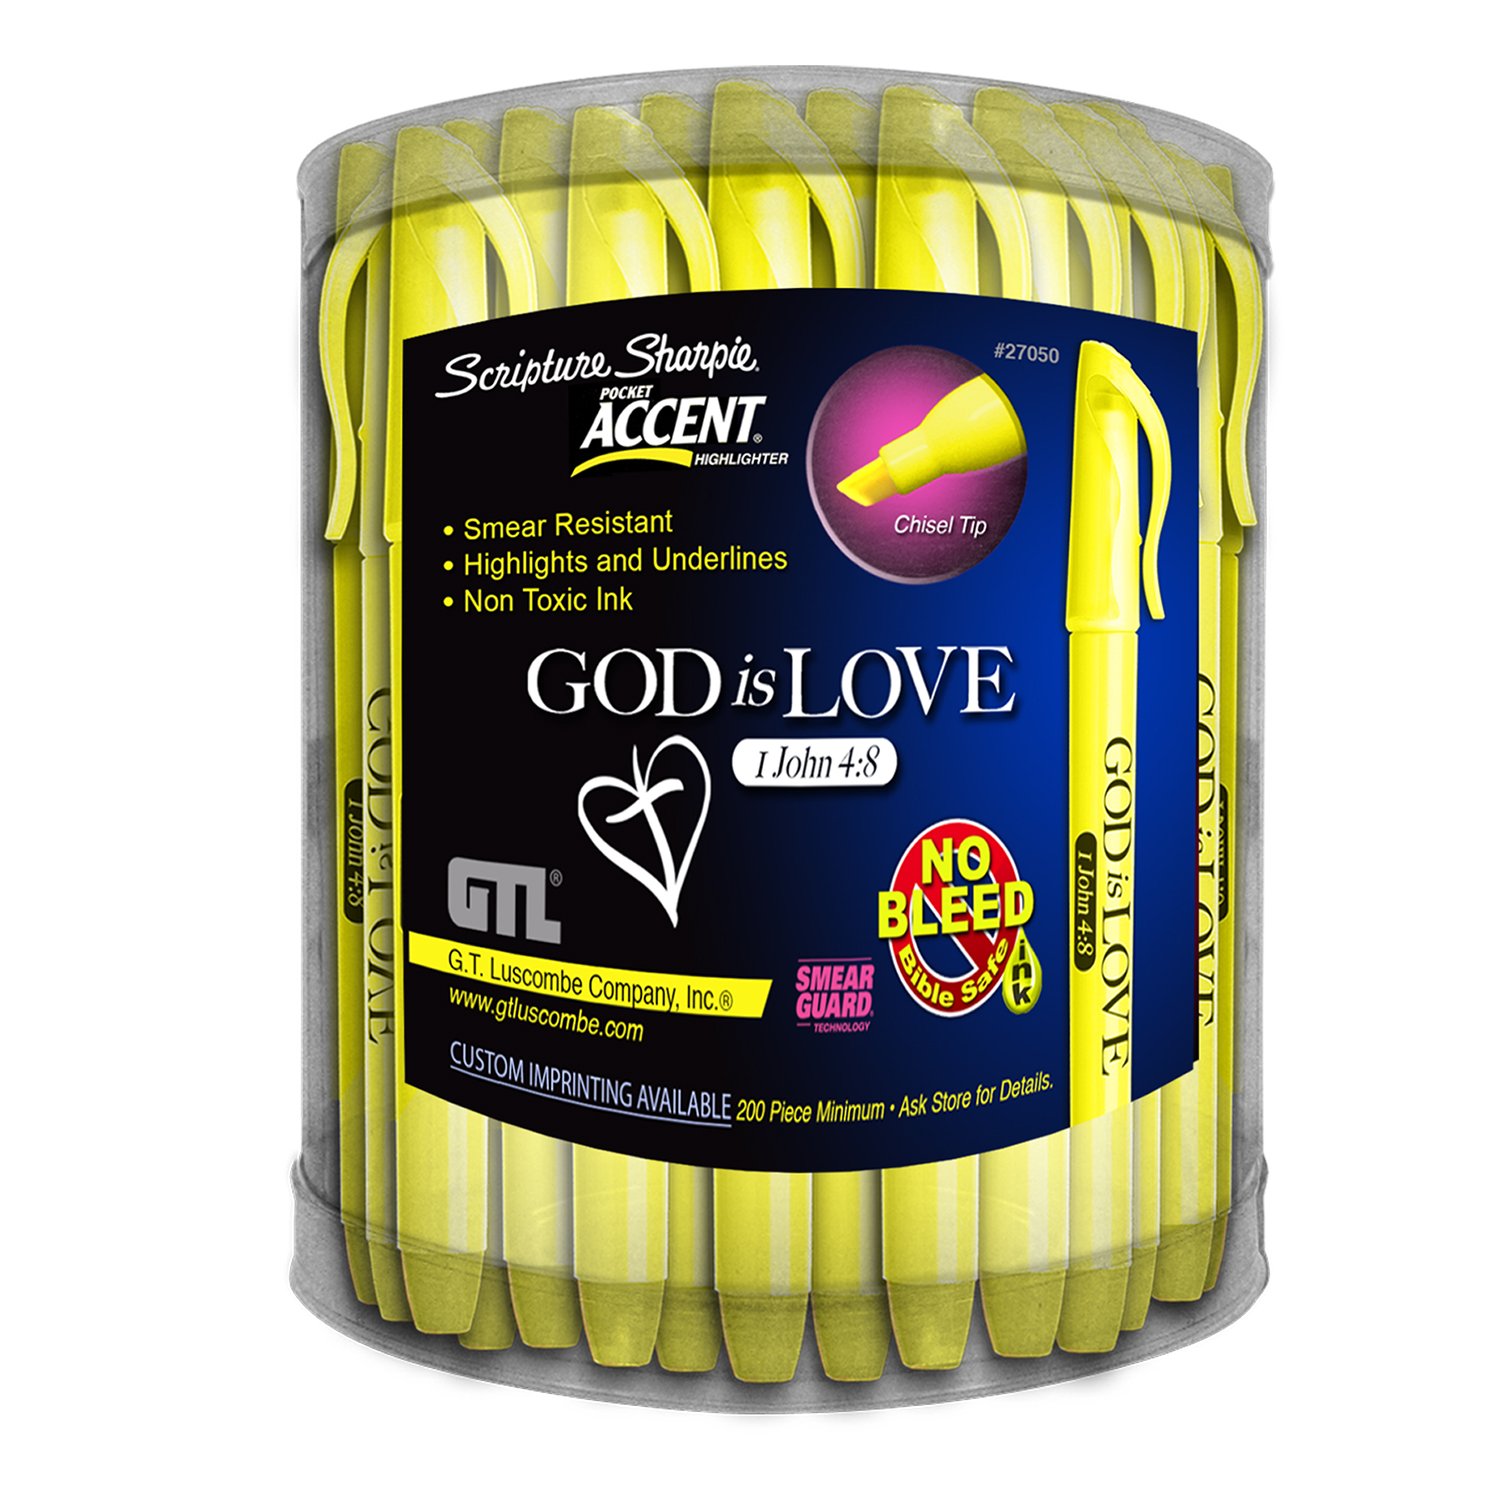 Accu-Gel Highlighter – Sword of the Lord Publications